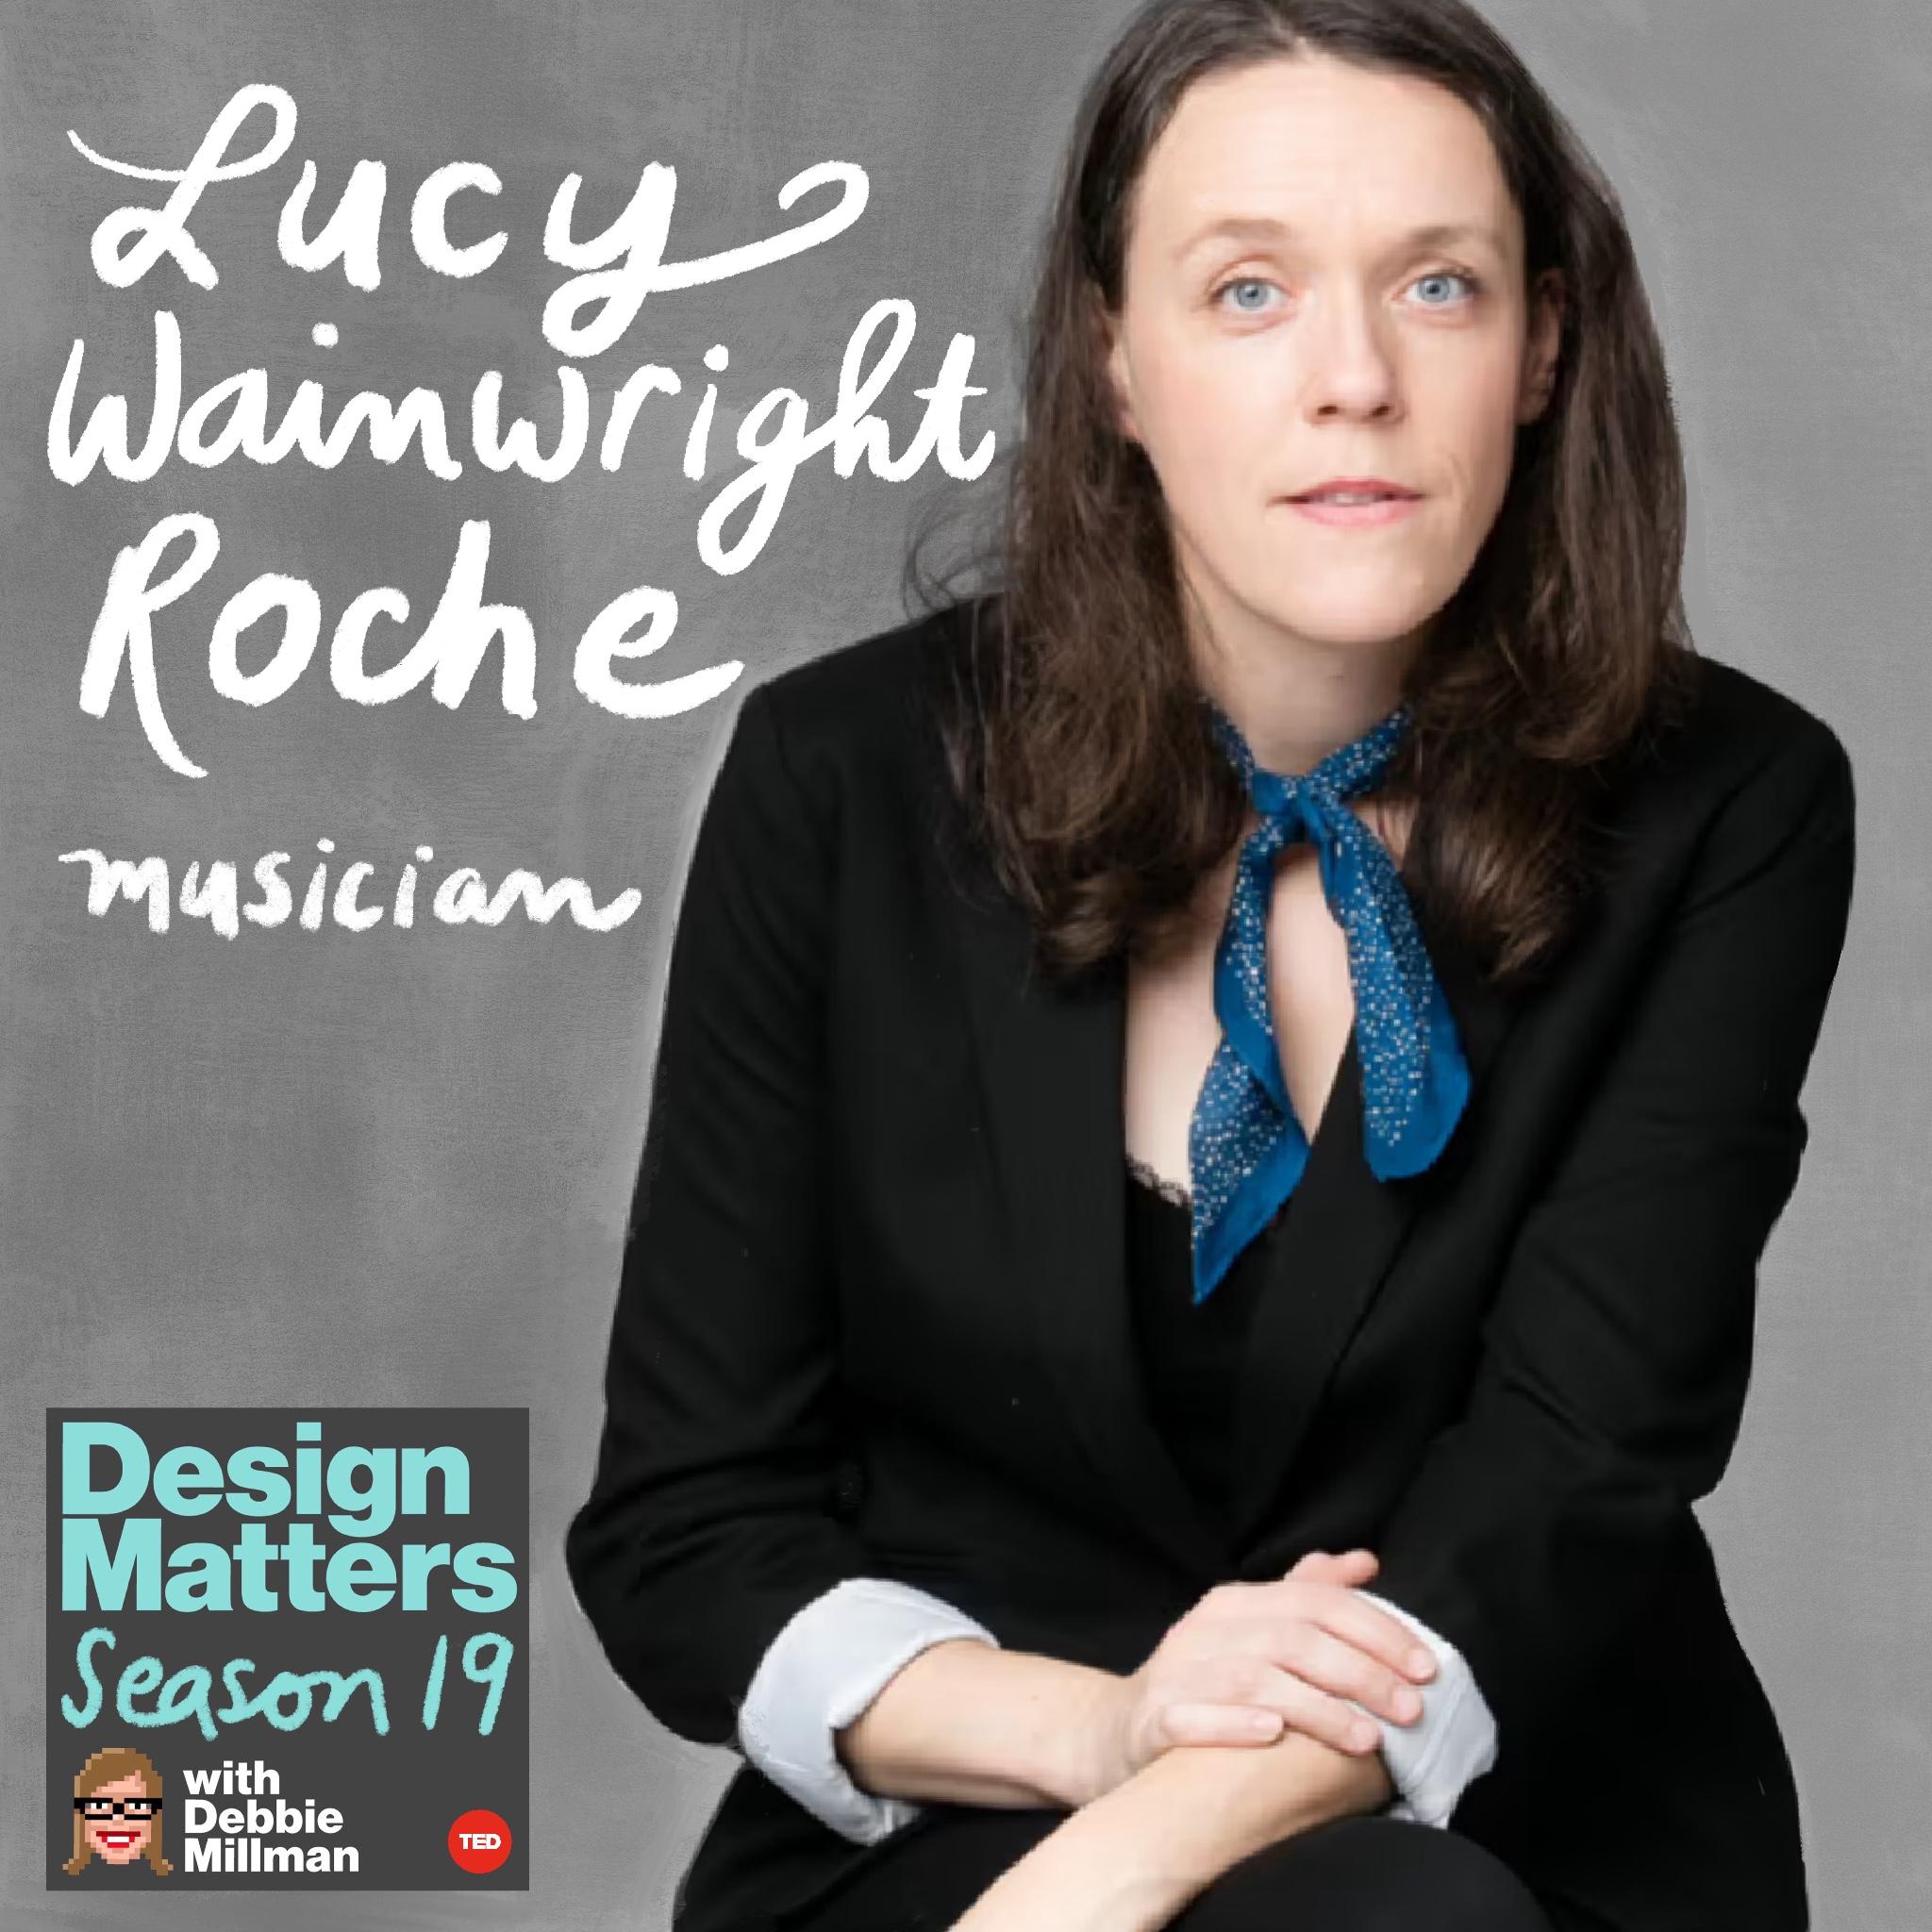 Thumbnail for "Best of Design Matters: Lucy Wainwright Roche".